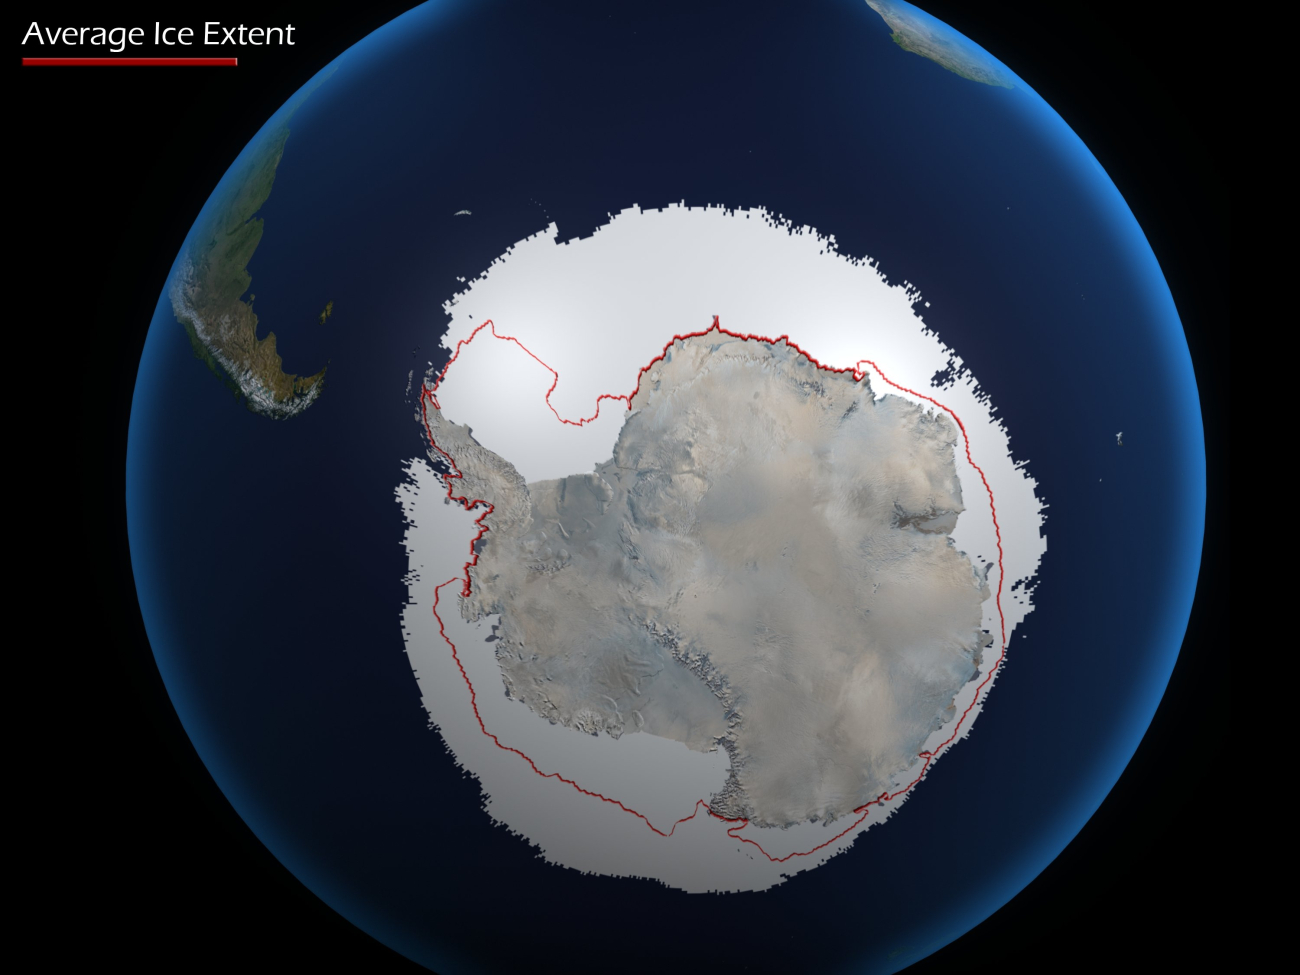 Antarctic ice extent in June of 2010 were much higher than what had beenobserved historically from satellites